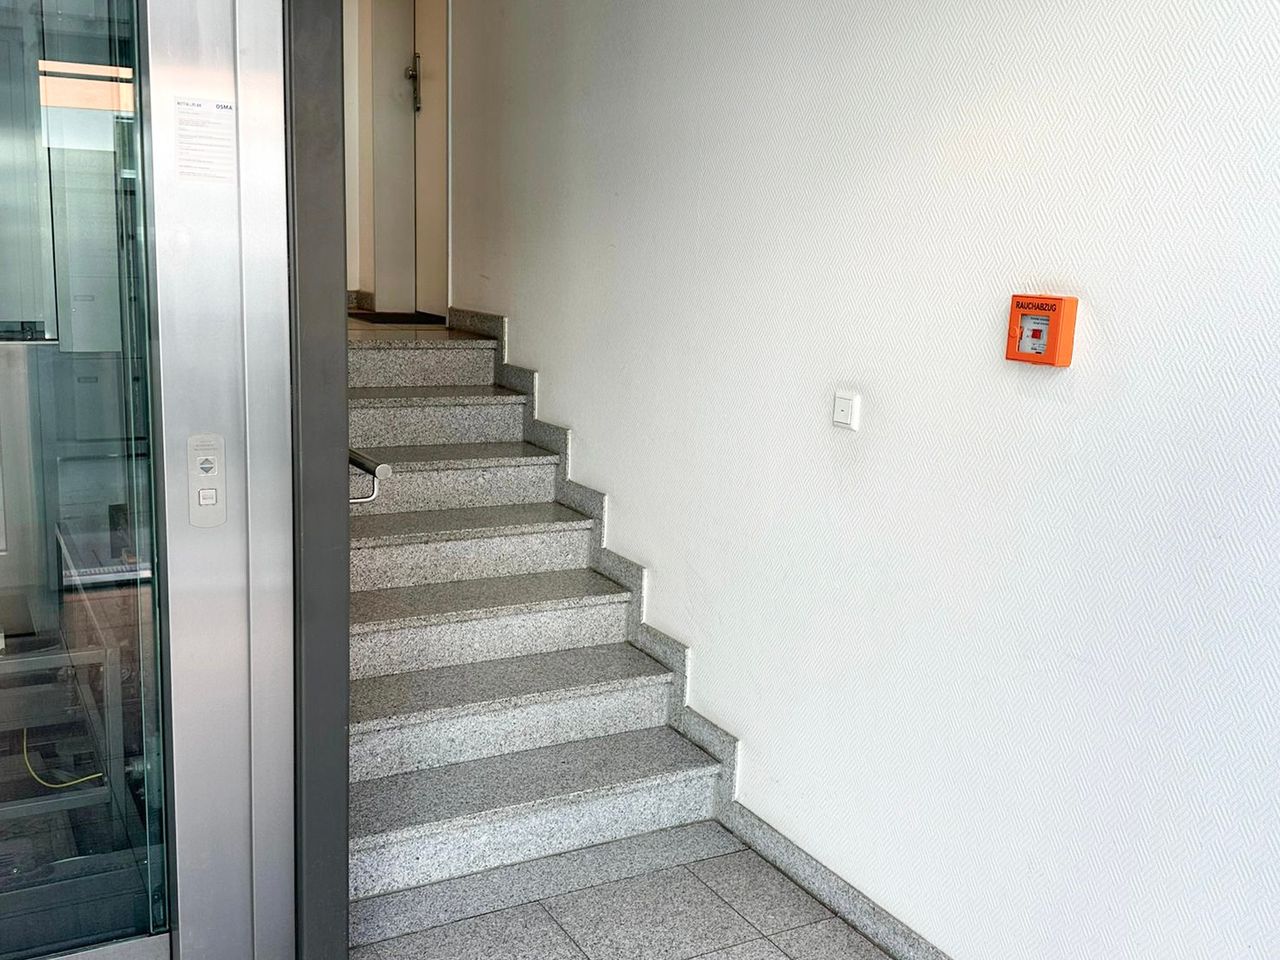 Luxury flat, TOP location in the centre of Cologne, fantastic balcony, underground parking space